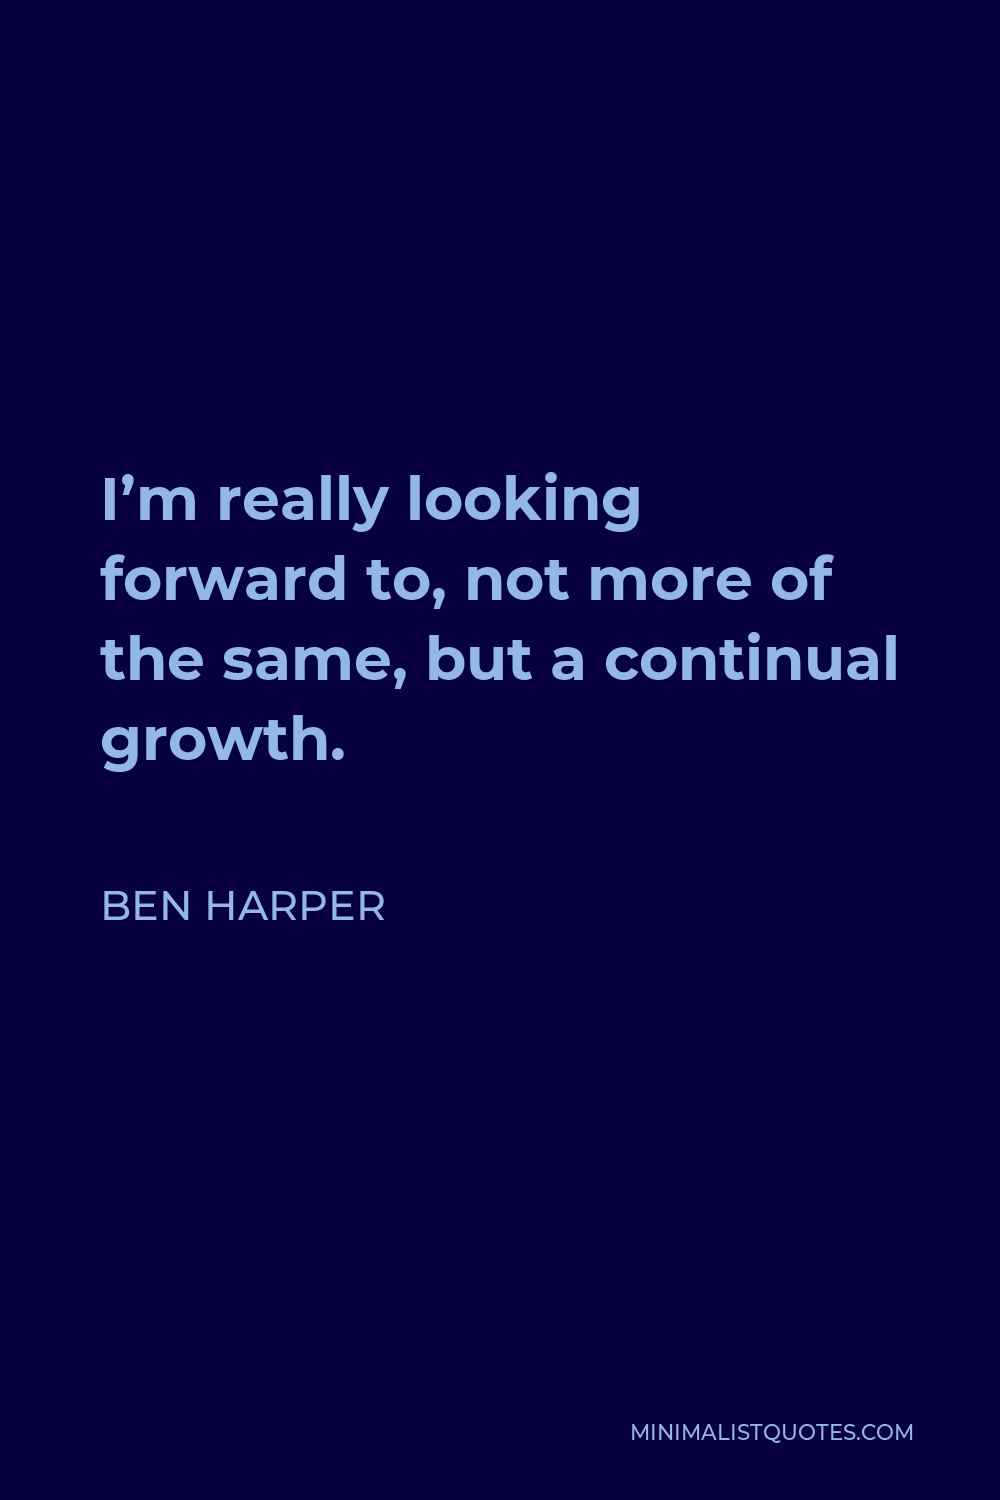 Ben Harper Quote - I’m really looking forward to, not more of the same, but a continual growth.